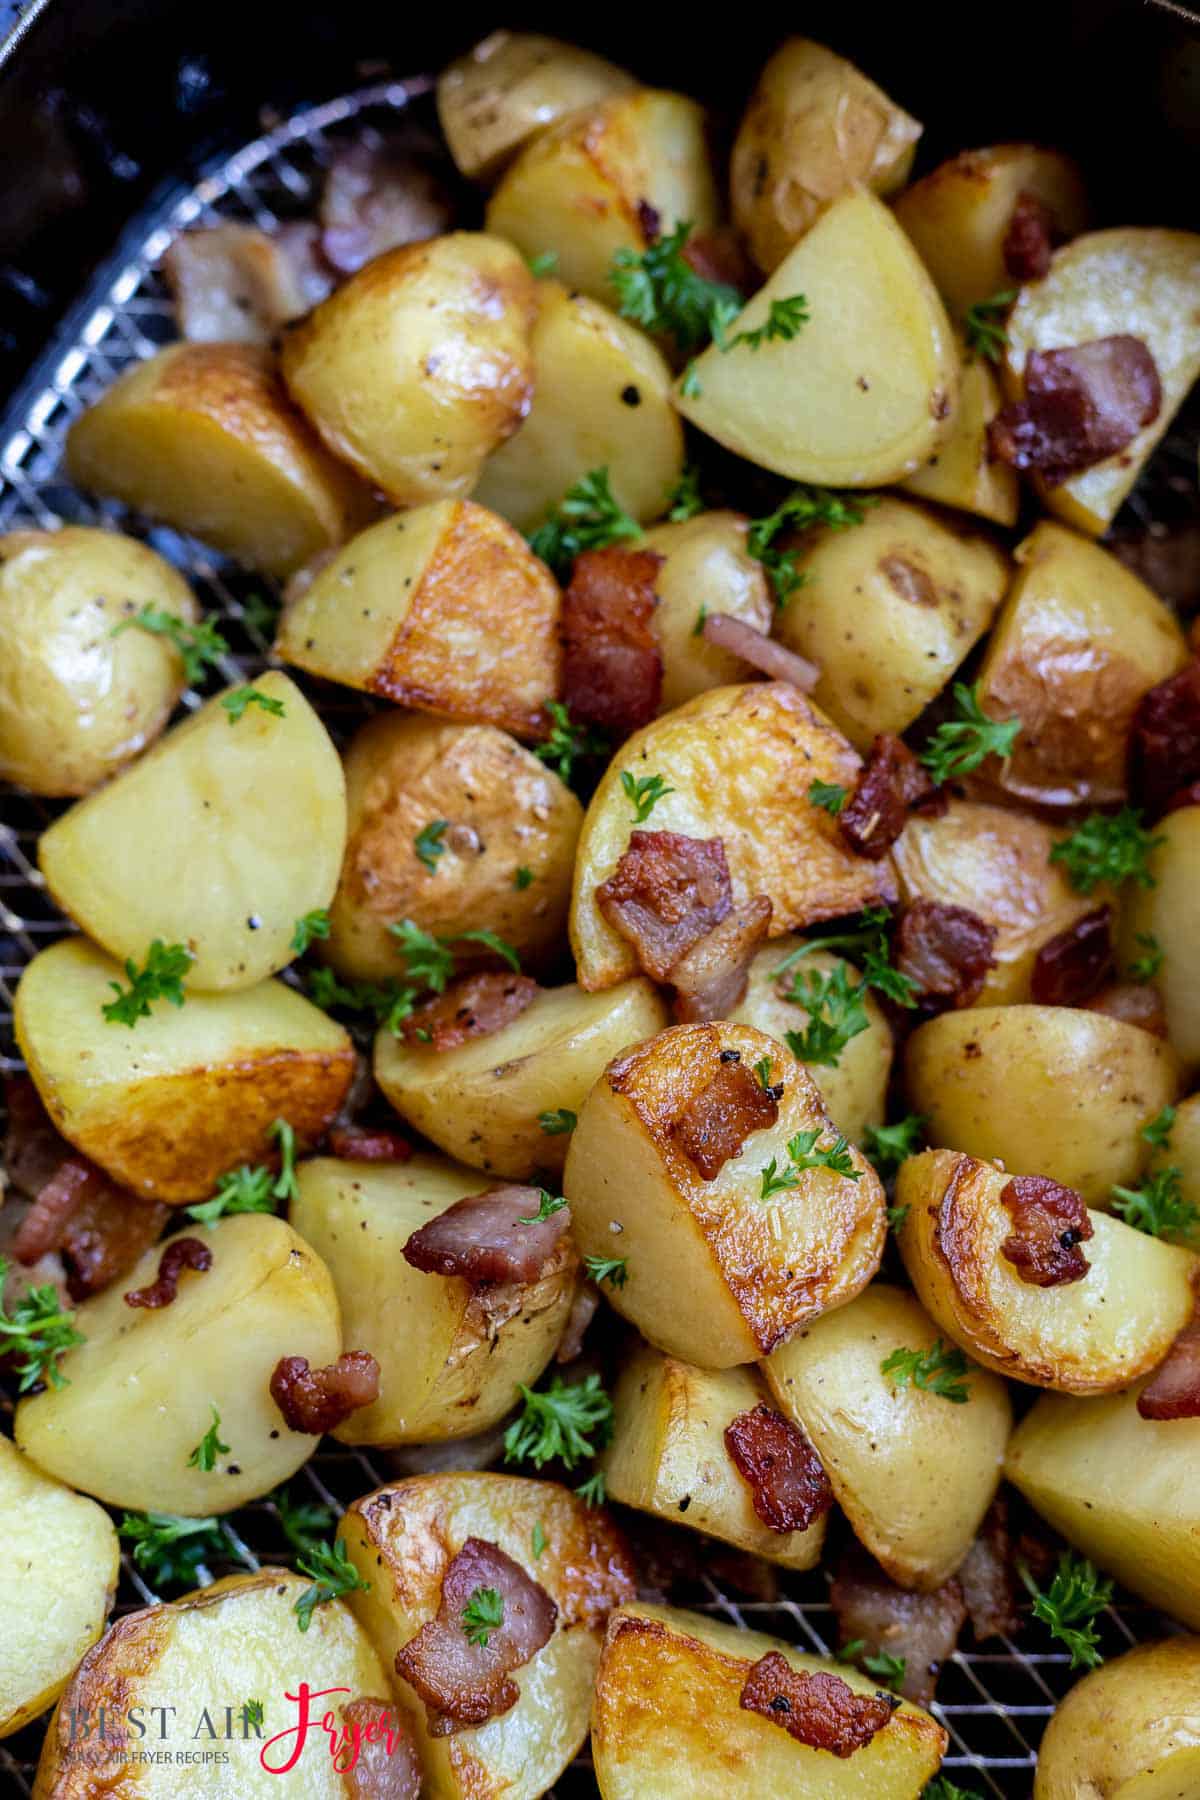 Air Fryer Roasted Potatoes and Bacon